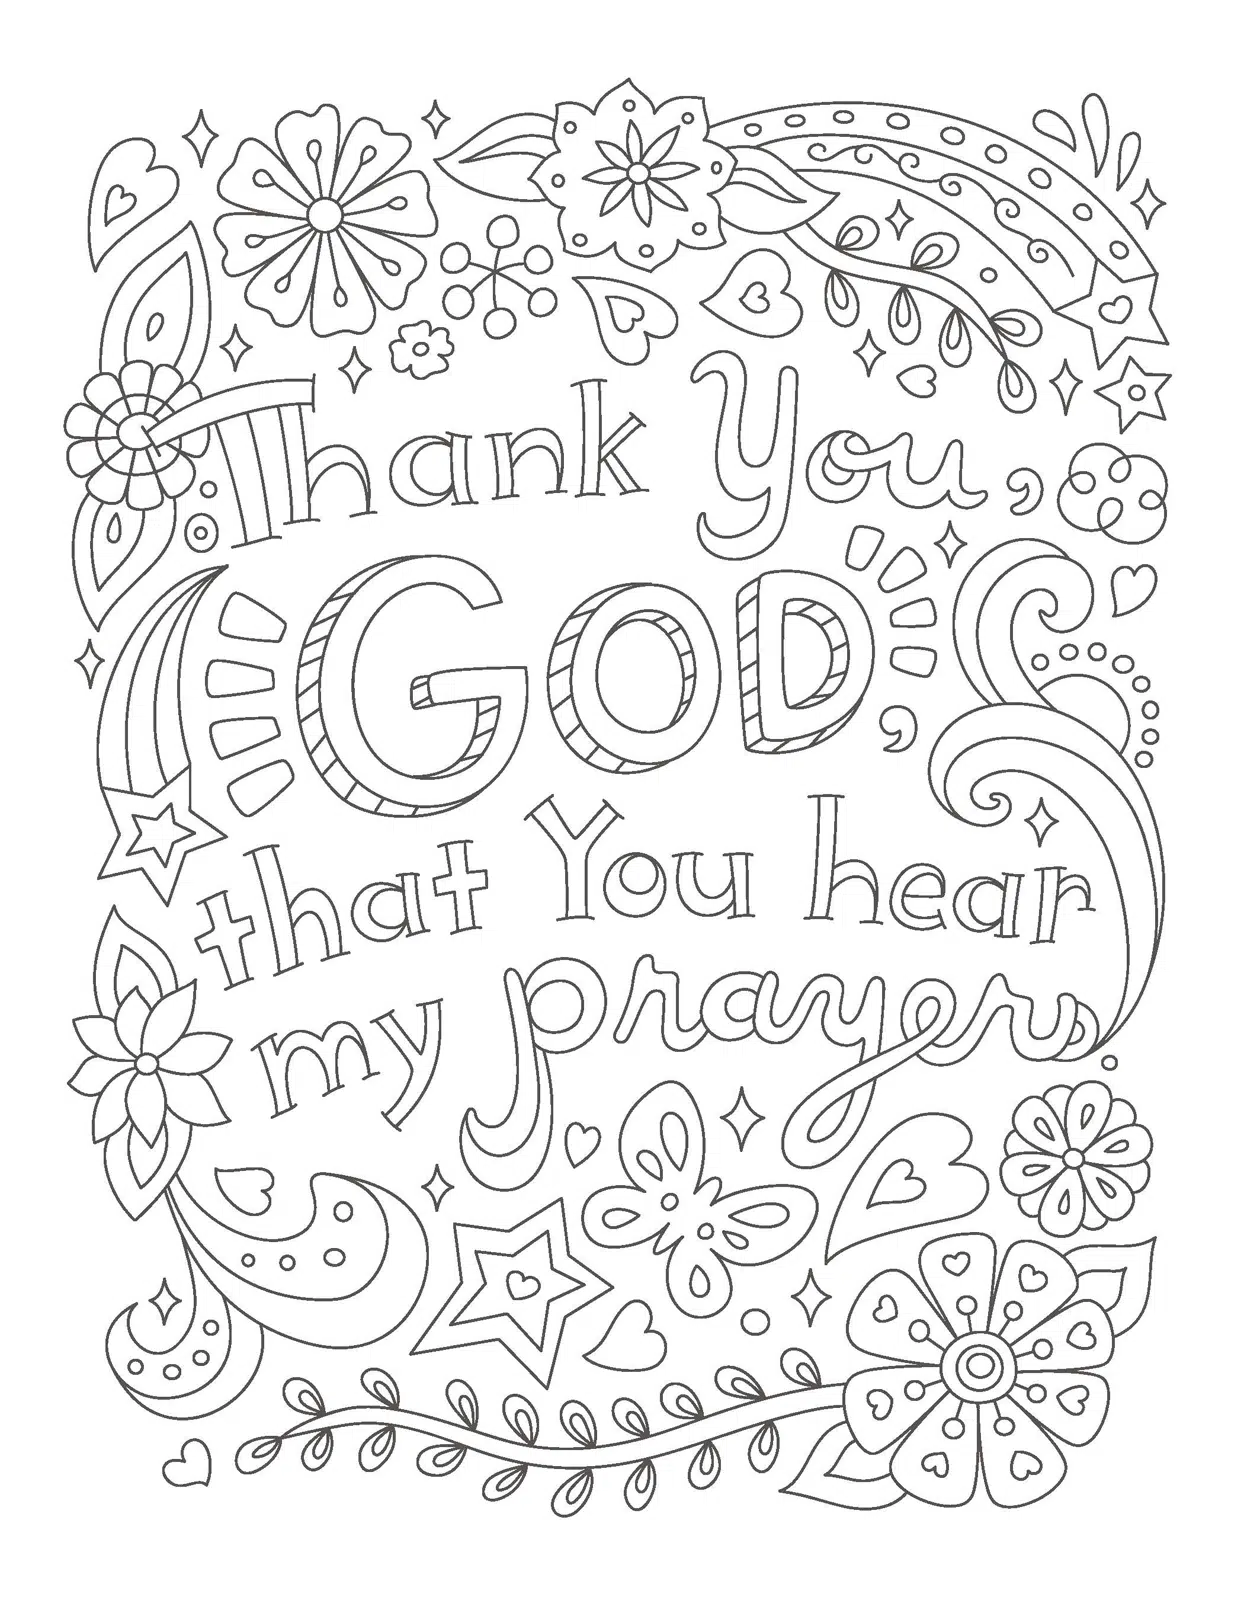 God Is Love Adult Coloring Book: Christian Coloring Book For Women